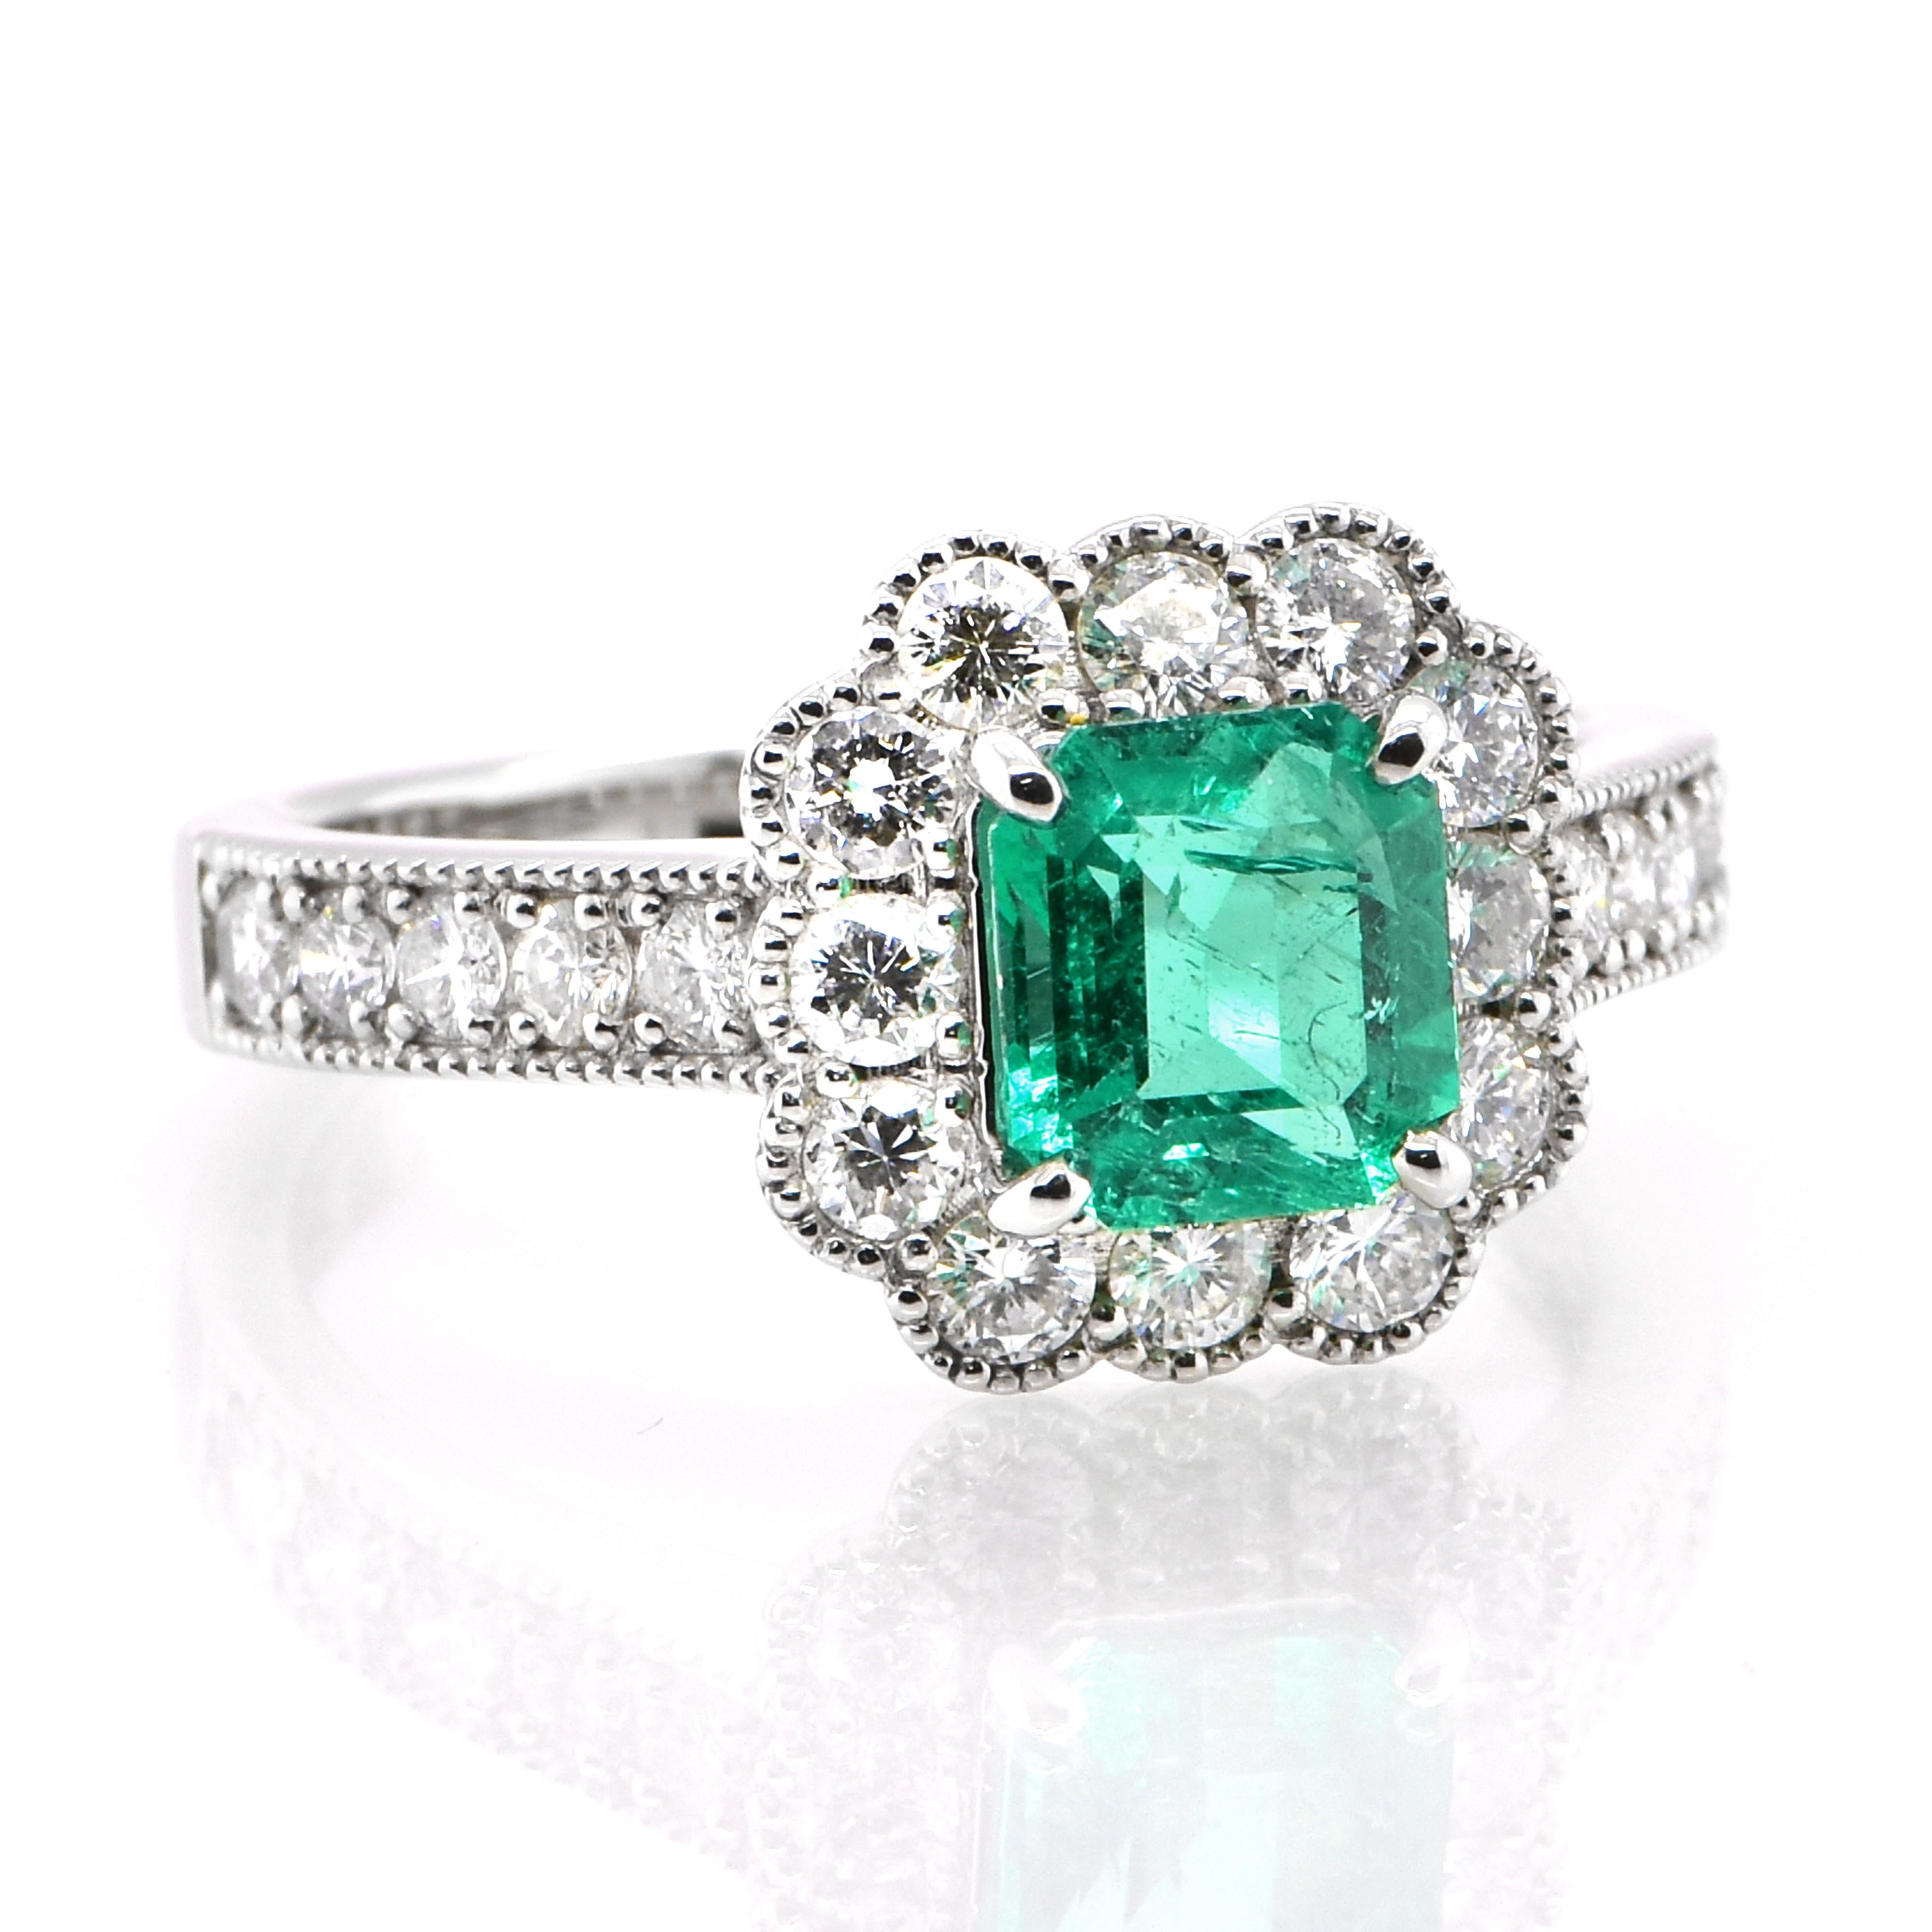 Modern 1.15 Carat Natural Colombian Emerald and Diamond Ring Set in Platinum For Sale